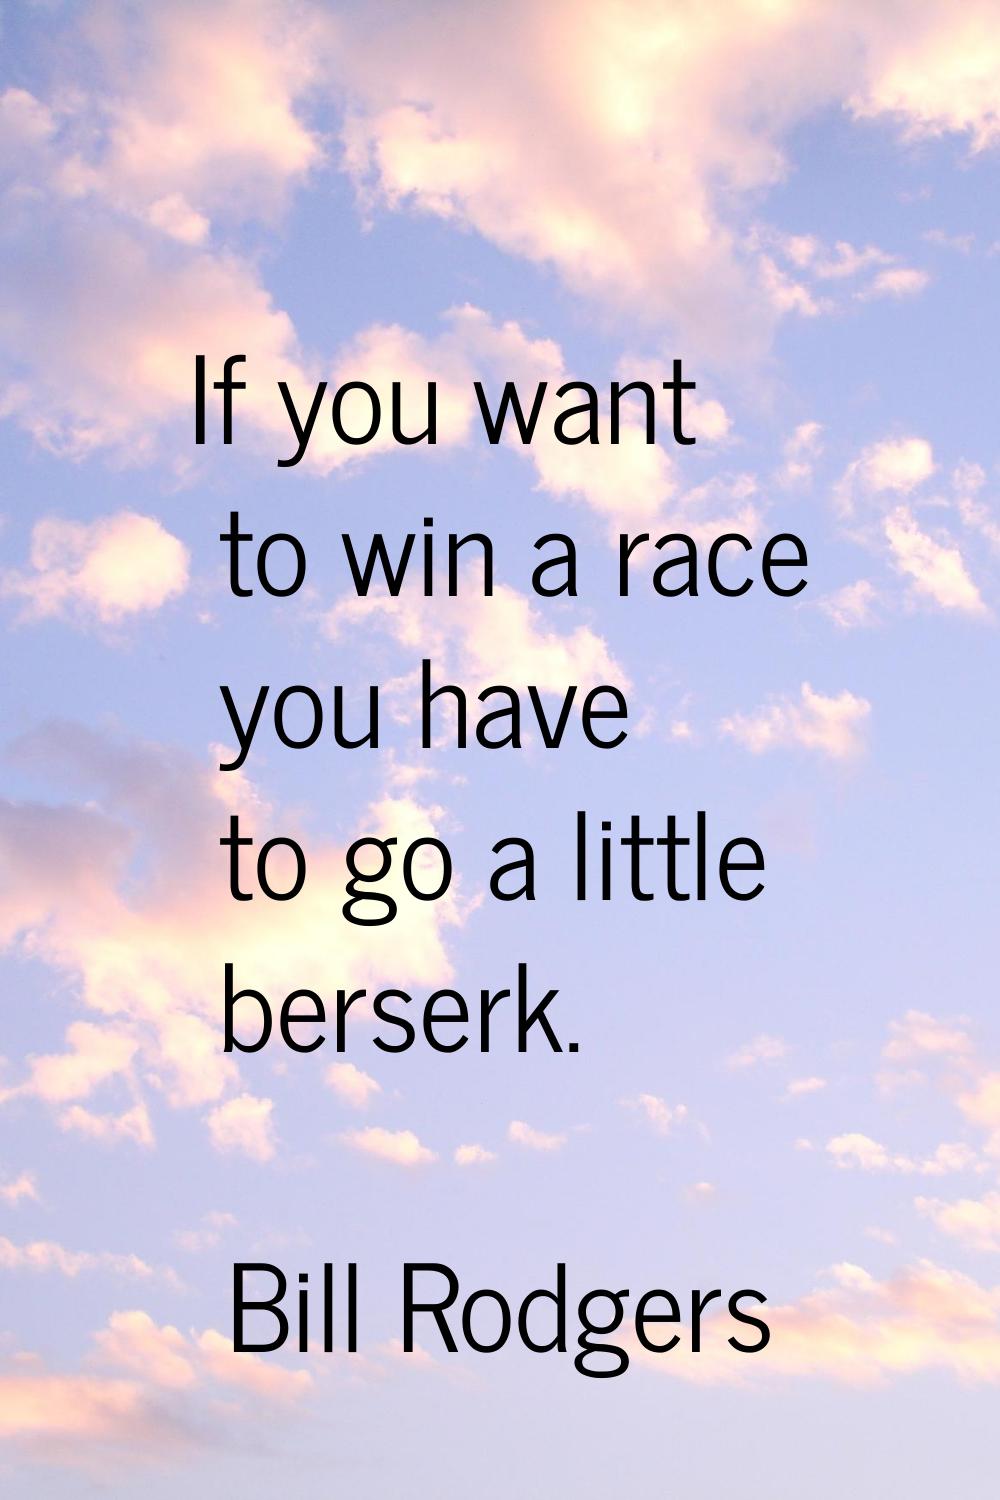 If you want to win a race you have to go a little berserk.